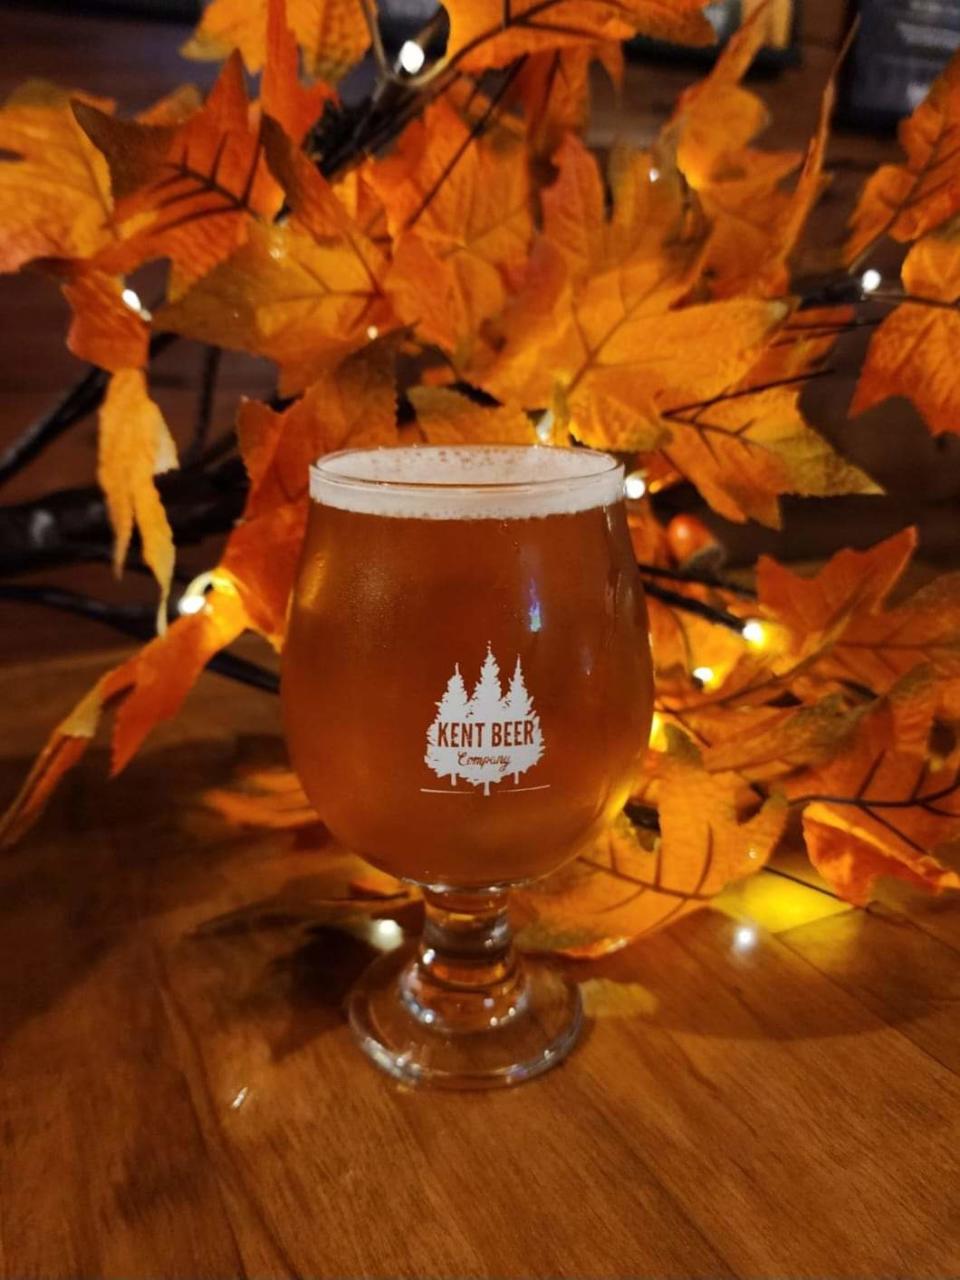 Kent Beer Company of Andover is releasing a new flavor using sap from local producers, Sugar Shack Maple Amber. It will be released during a special "Maple Madness" event at the brewery March 23 featuring maple-flavored food products from the Wellsville General Store.